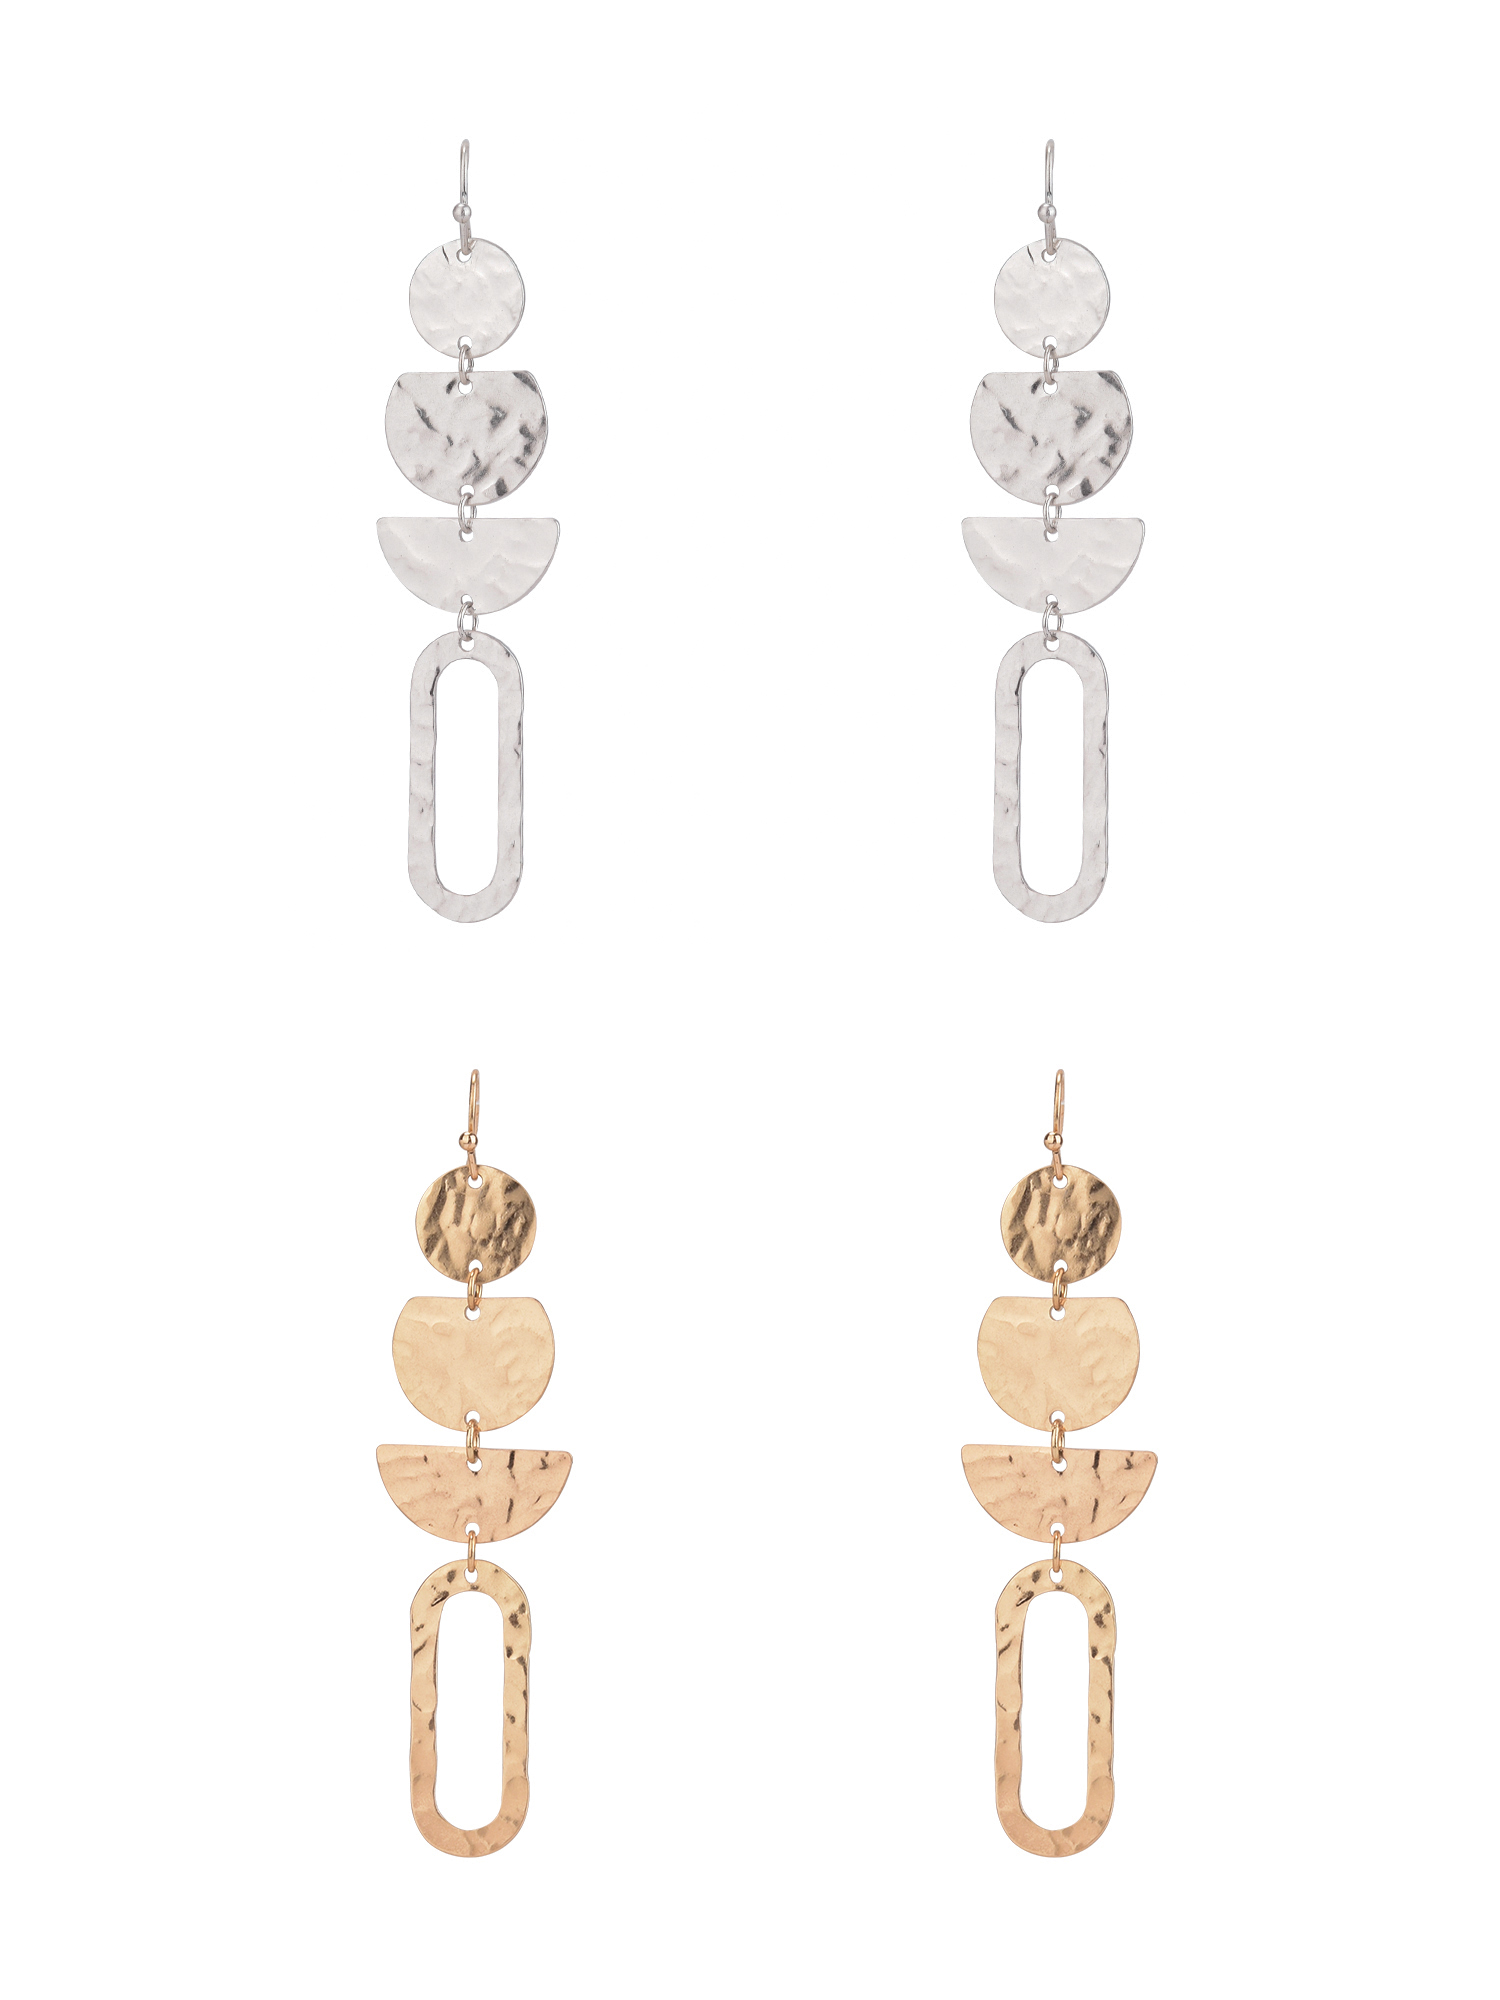 The Pioneer Woman - Women's Jewelry, Soft Silver-tone and Soft Gold-tone Metal Drop Duo Earring Set - image 1 of 6